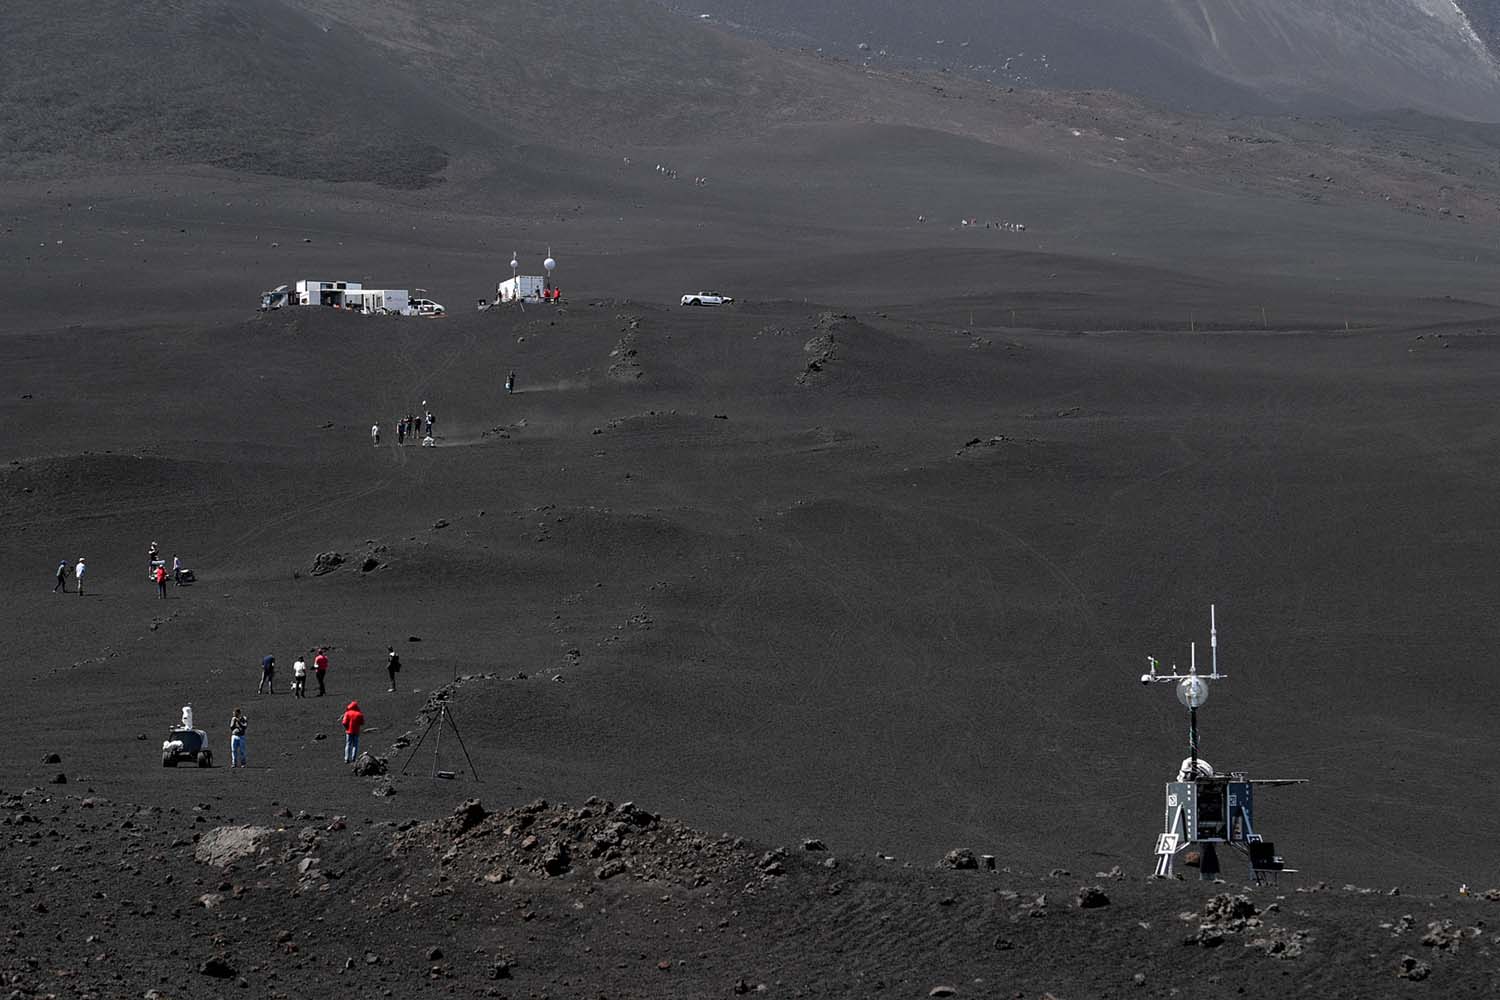 The team's base camp on Mount Etna, where they tested the capabilities of their robots at at altitude of around 2,600 meters. | Souce: DLR